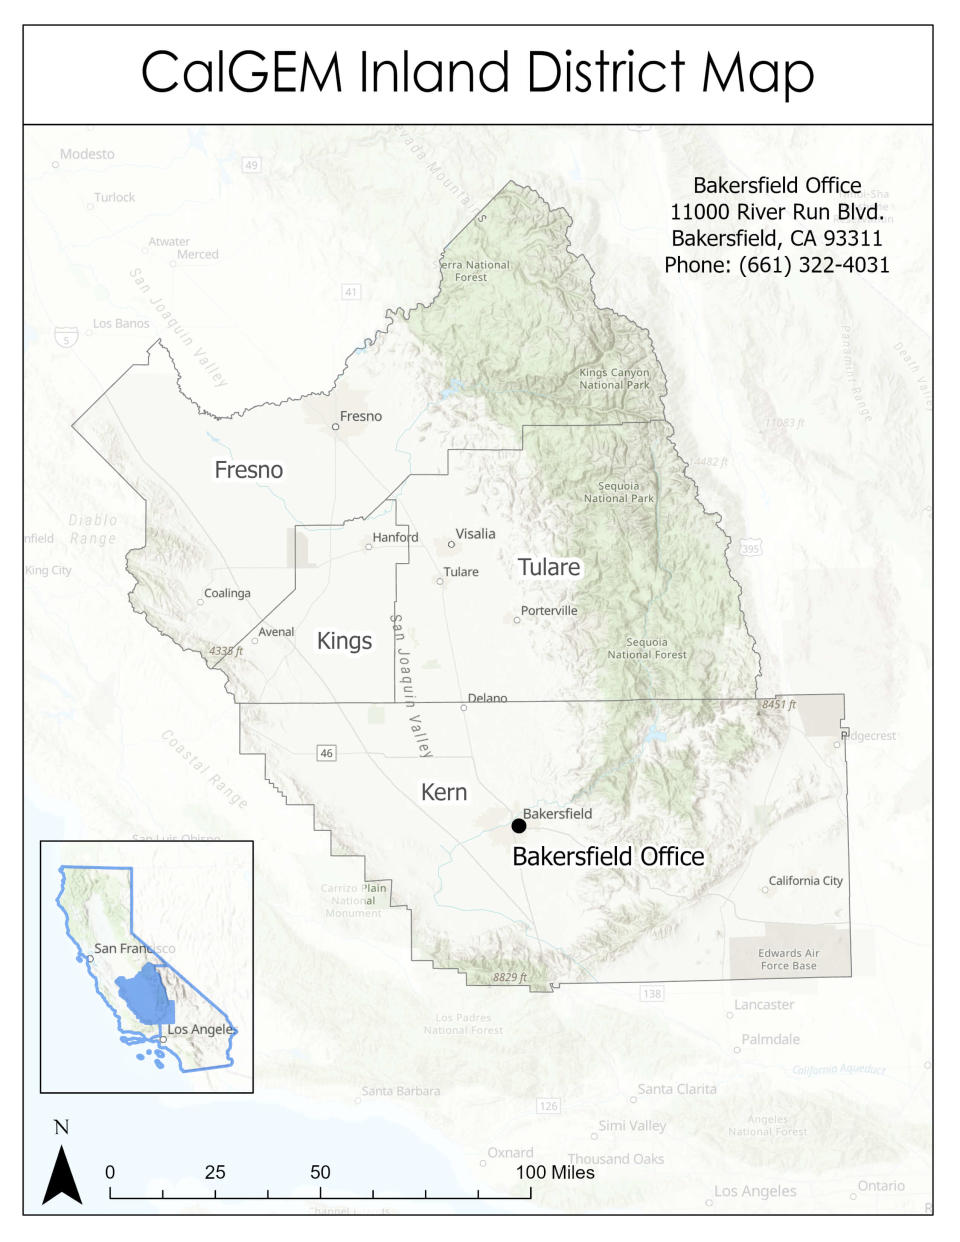 California's inland district for oil and gas management spans 20,400 square miles in four counties. May 2022